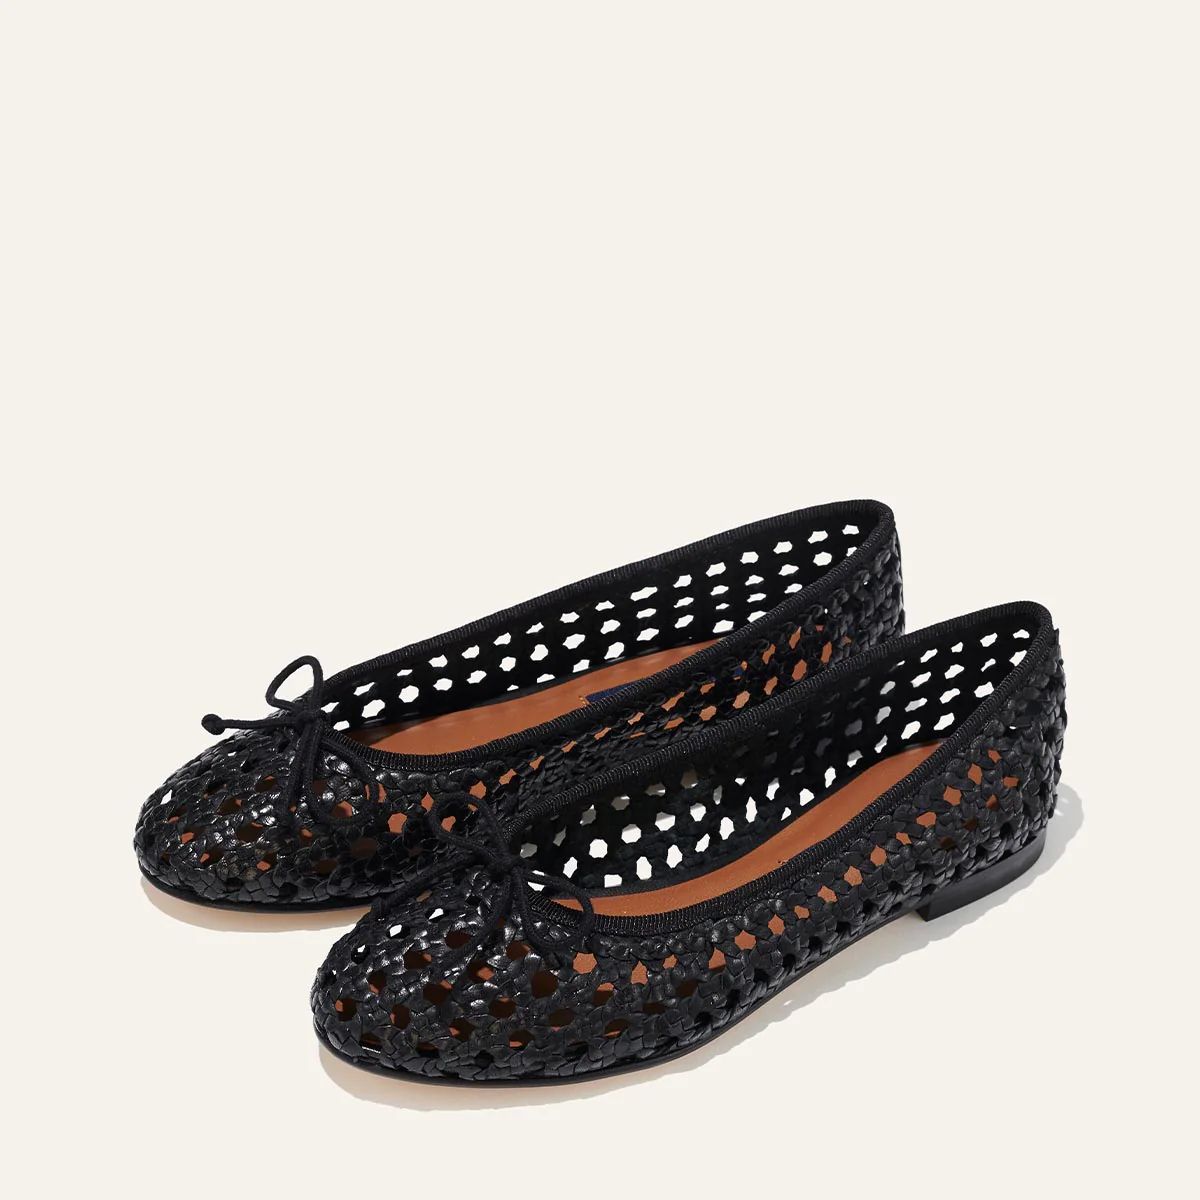 The Woven Demi - Black Nappa | Margaux